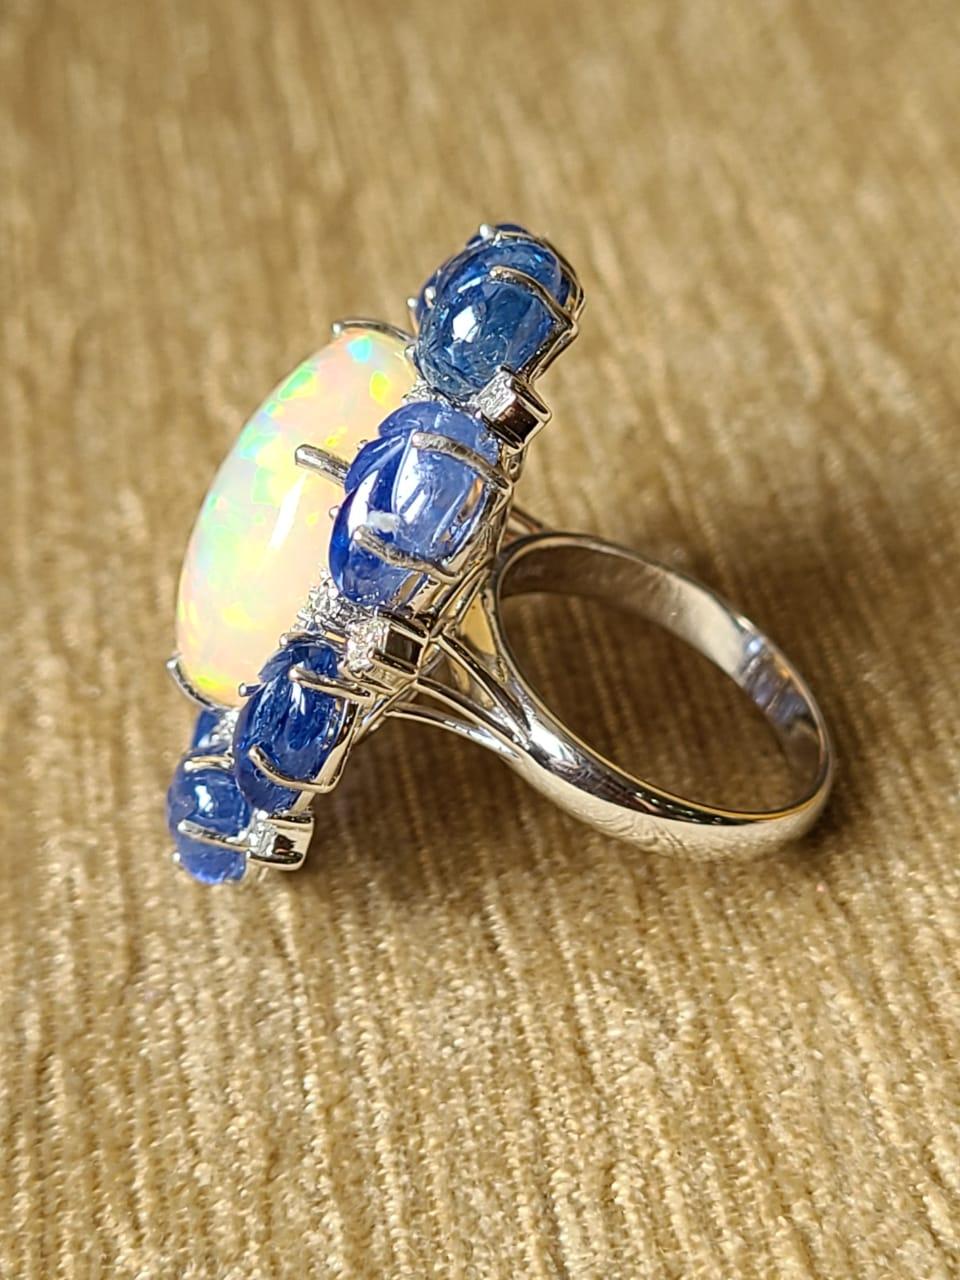 A very gorgeous and one of a kind, Ethiopian Opal & Blue Sapphire Cocktail Ring set in 18K White Gold. The weight of the Opal is 14.68 carats. The Opal is completely natural, without any treatment and is of Ethiopian origin. The weight of the Blue